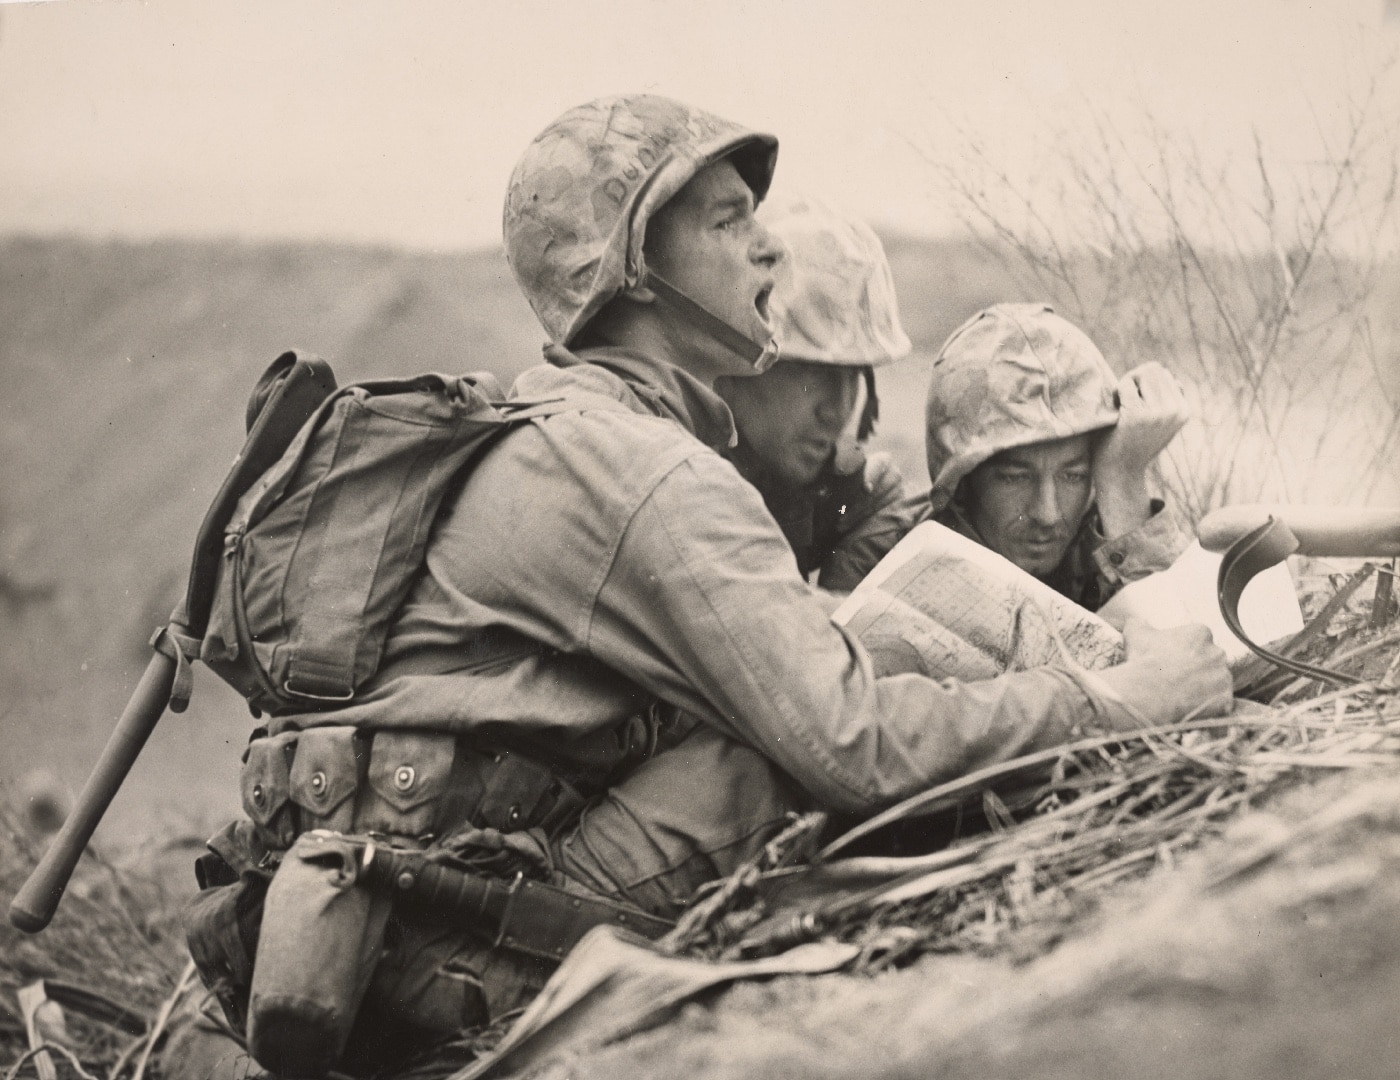 Marine spotters in a forward OP located an enemy machine gun nest and call in artillery and mortar fire. Image: Cpl. John T. Dreyfuss/U.S. Marine Corps